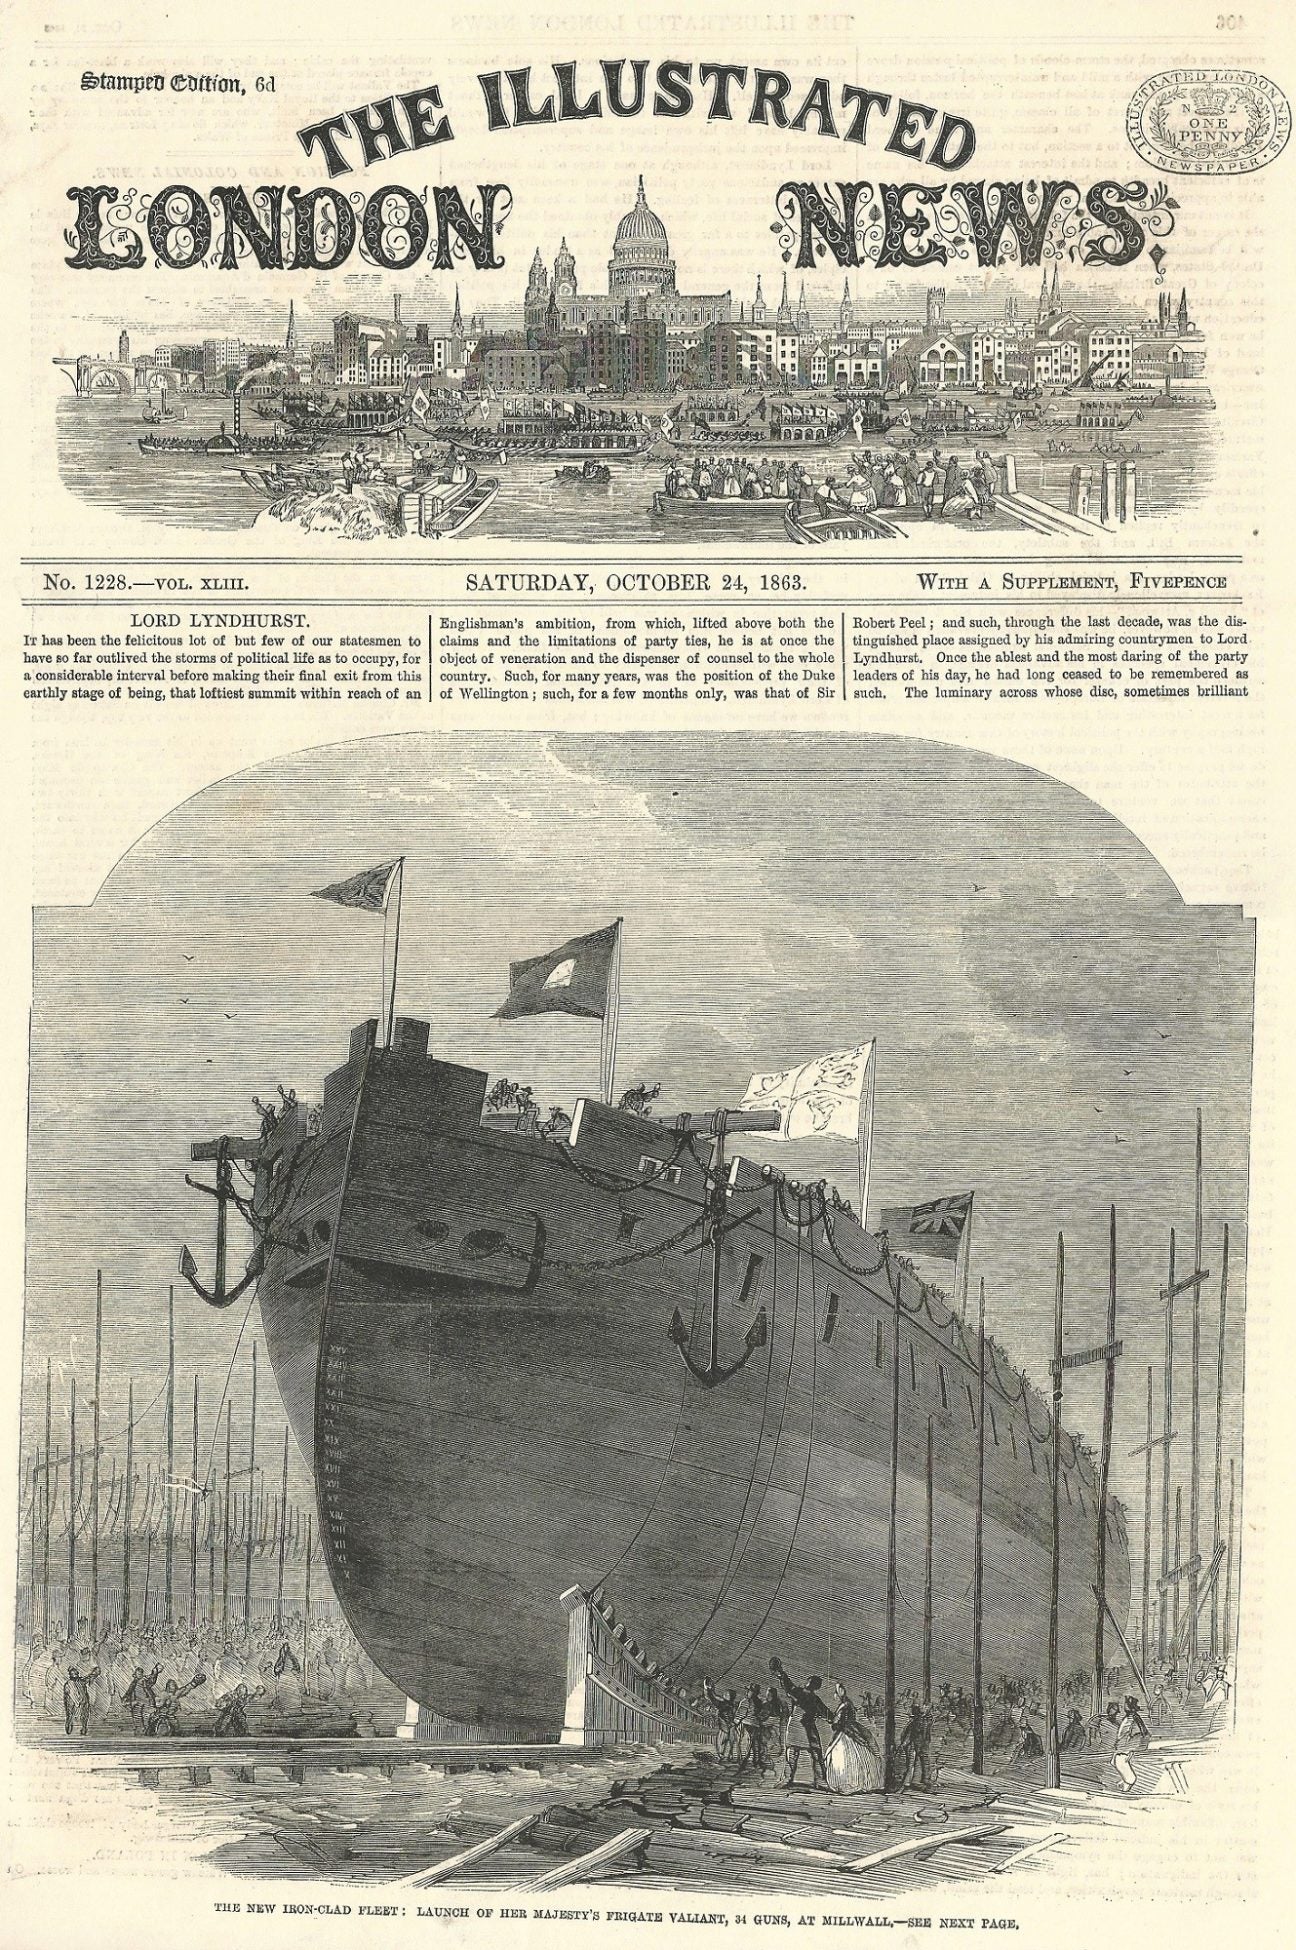 HMS Valiant iron-clad frigate launched at Millwall 1863